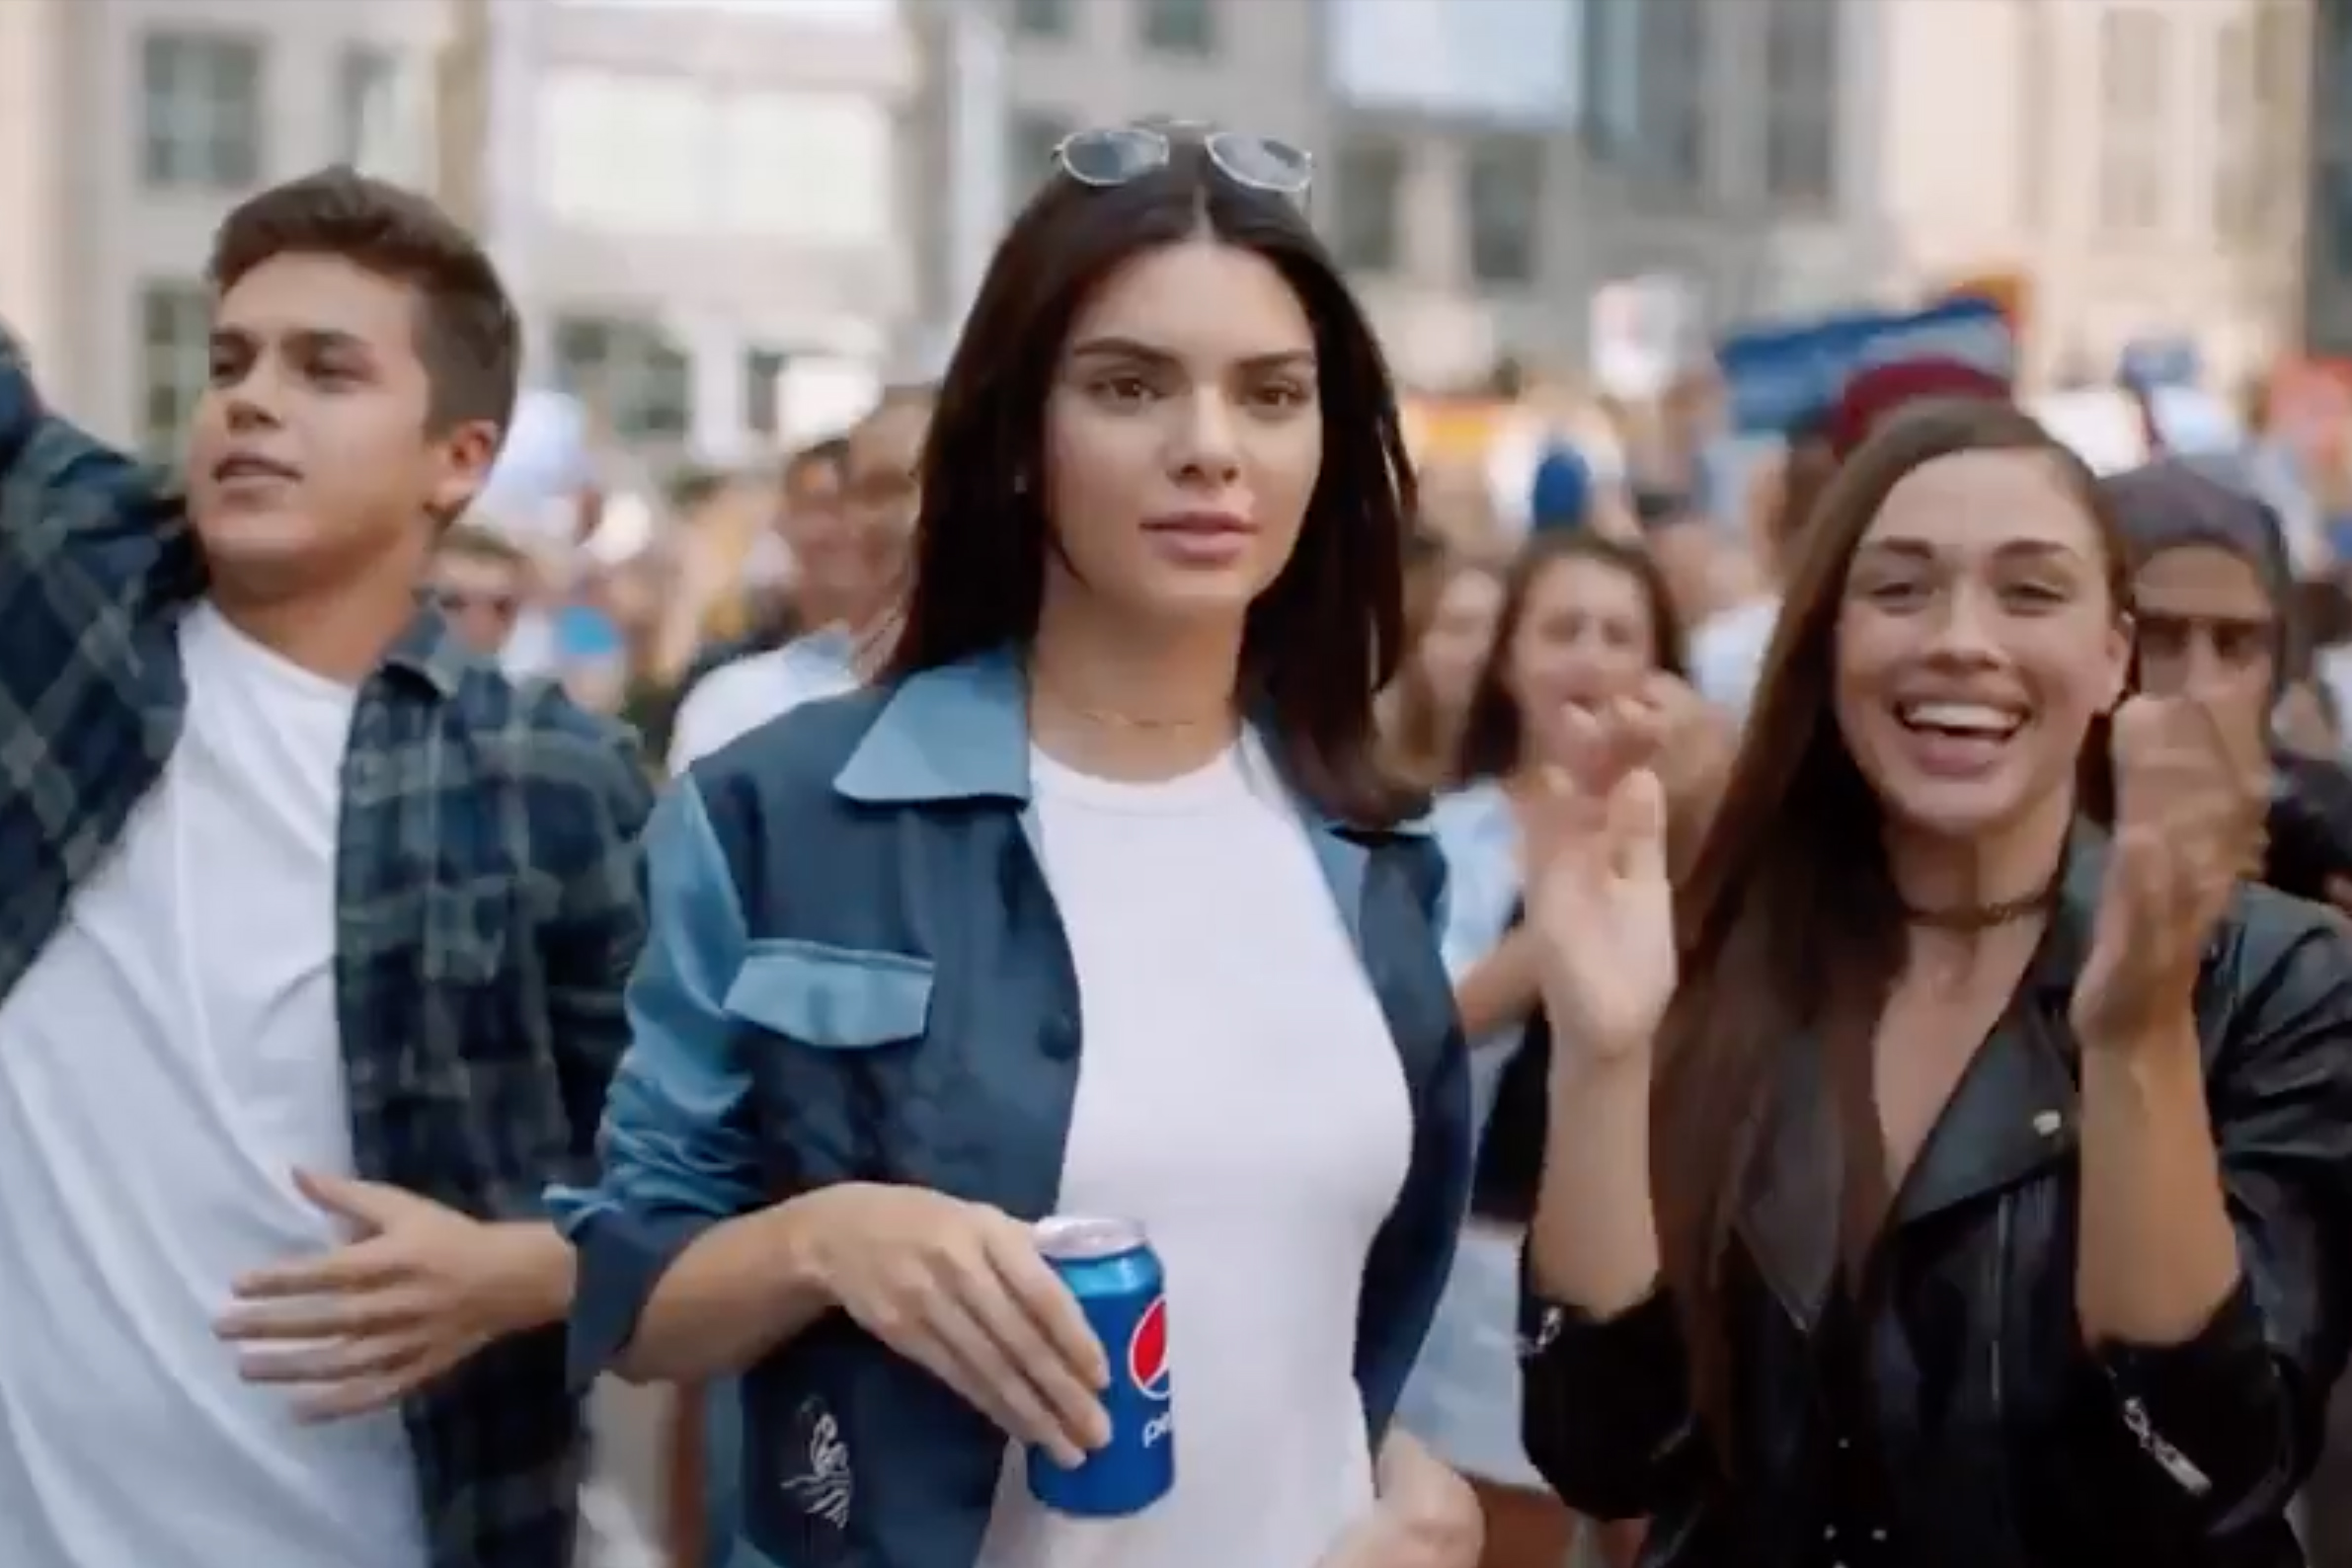 Pepsi and Kendall Jenner Brand Collaboration